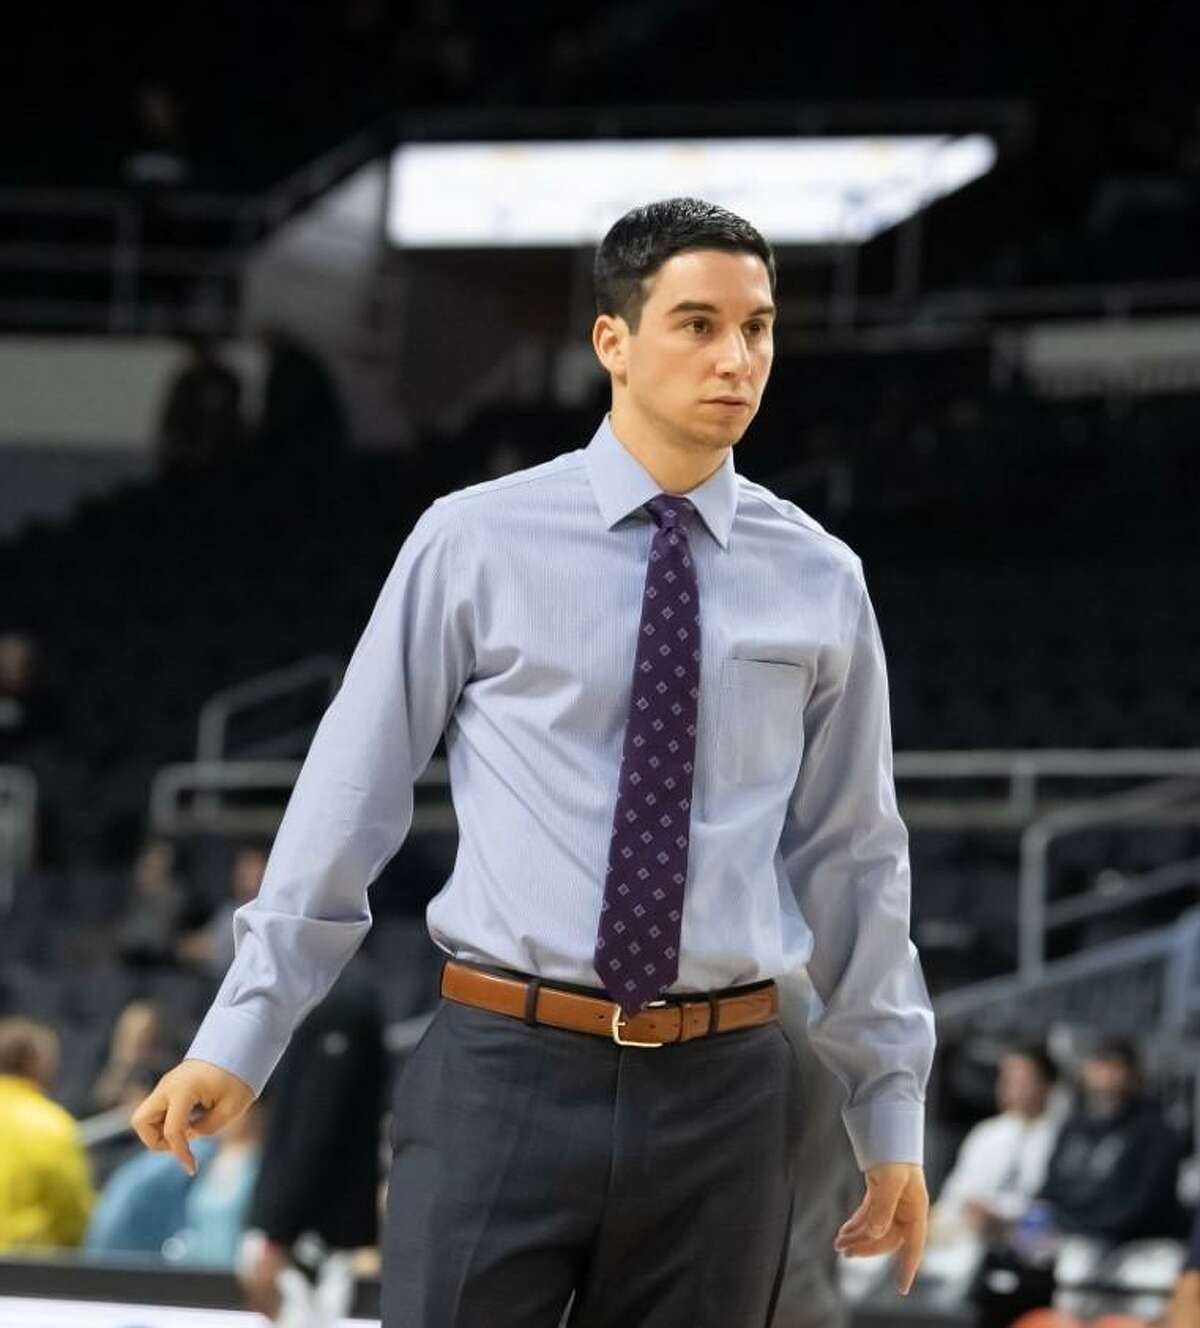 Wallingford’s Phil Gaetano is in his second season as an assistant coach with the Merrimack men’s basketball team.